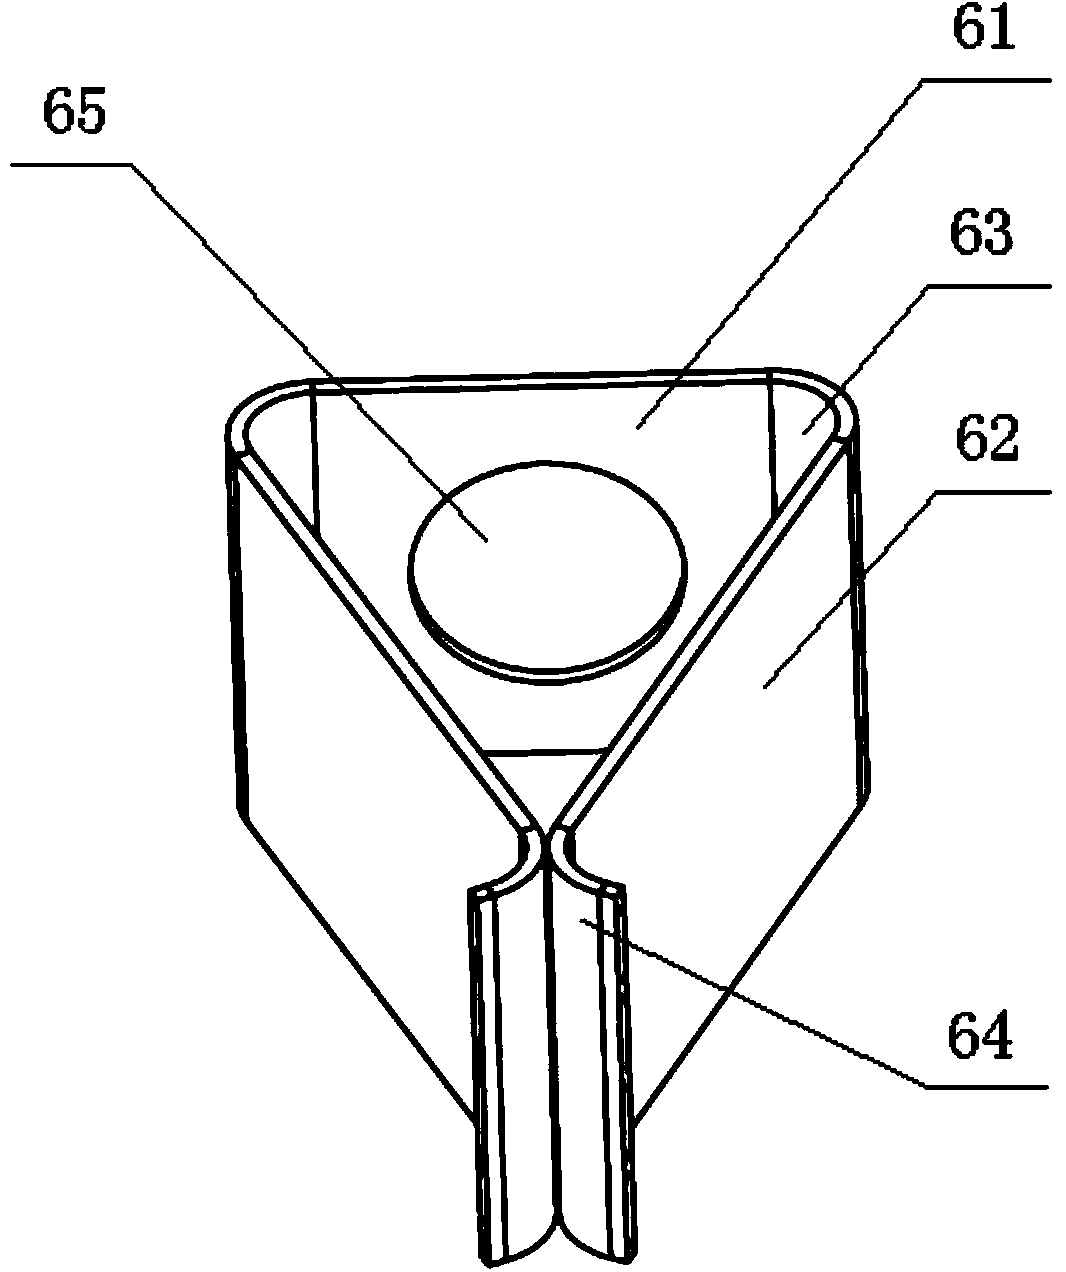 Photovoltaic junction box with detection holes